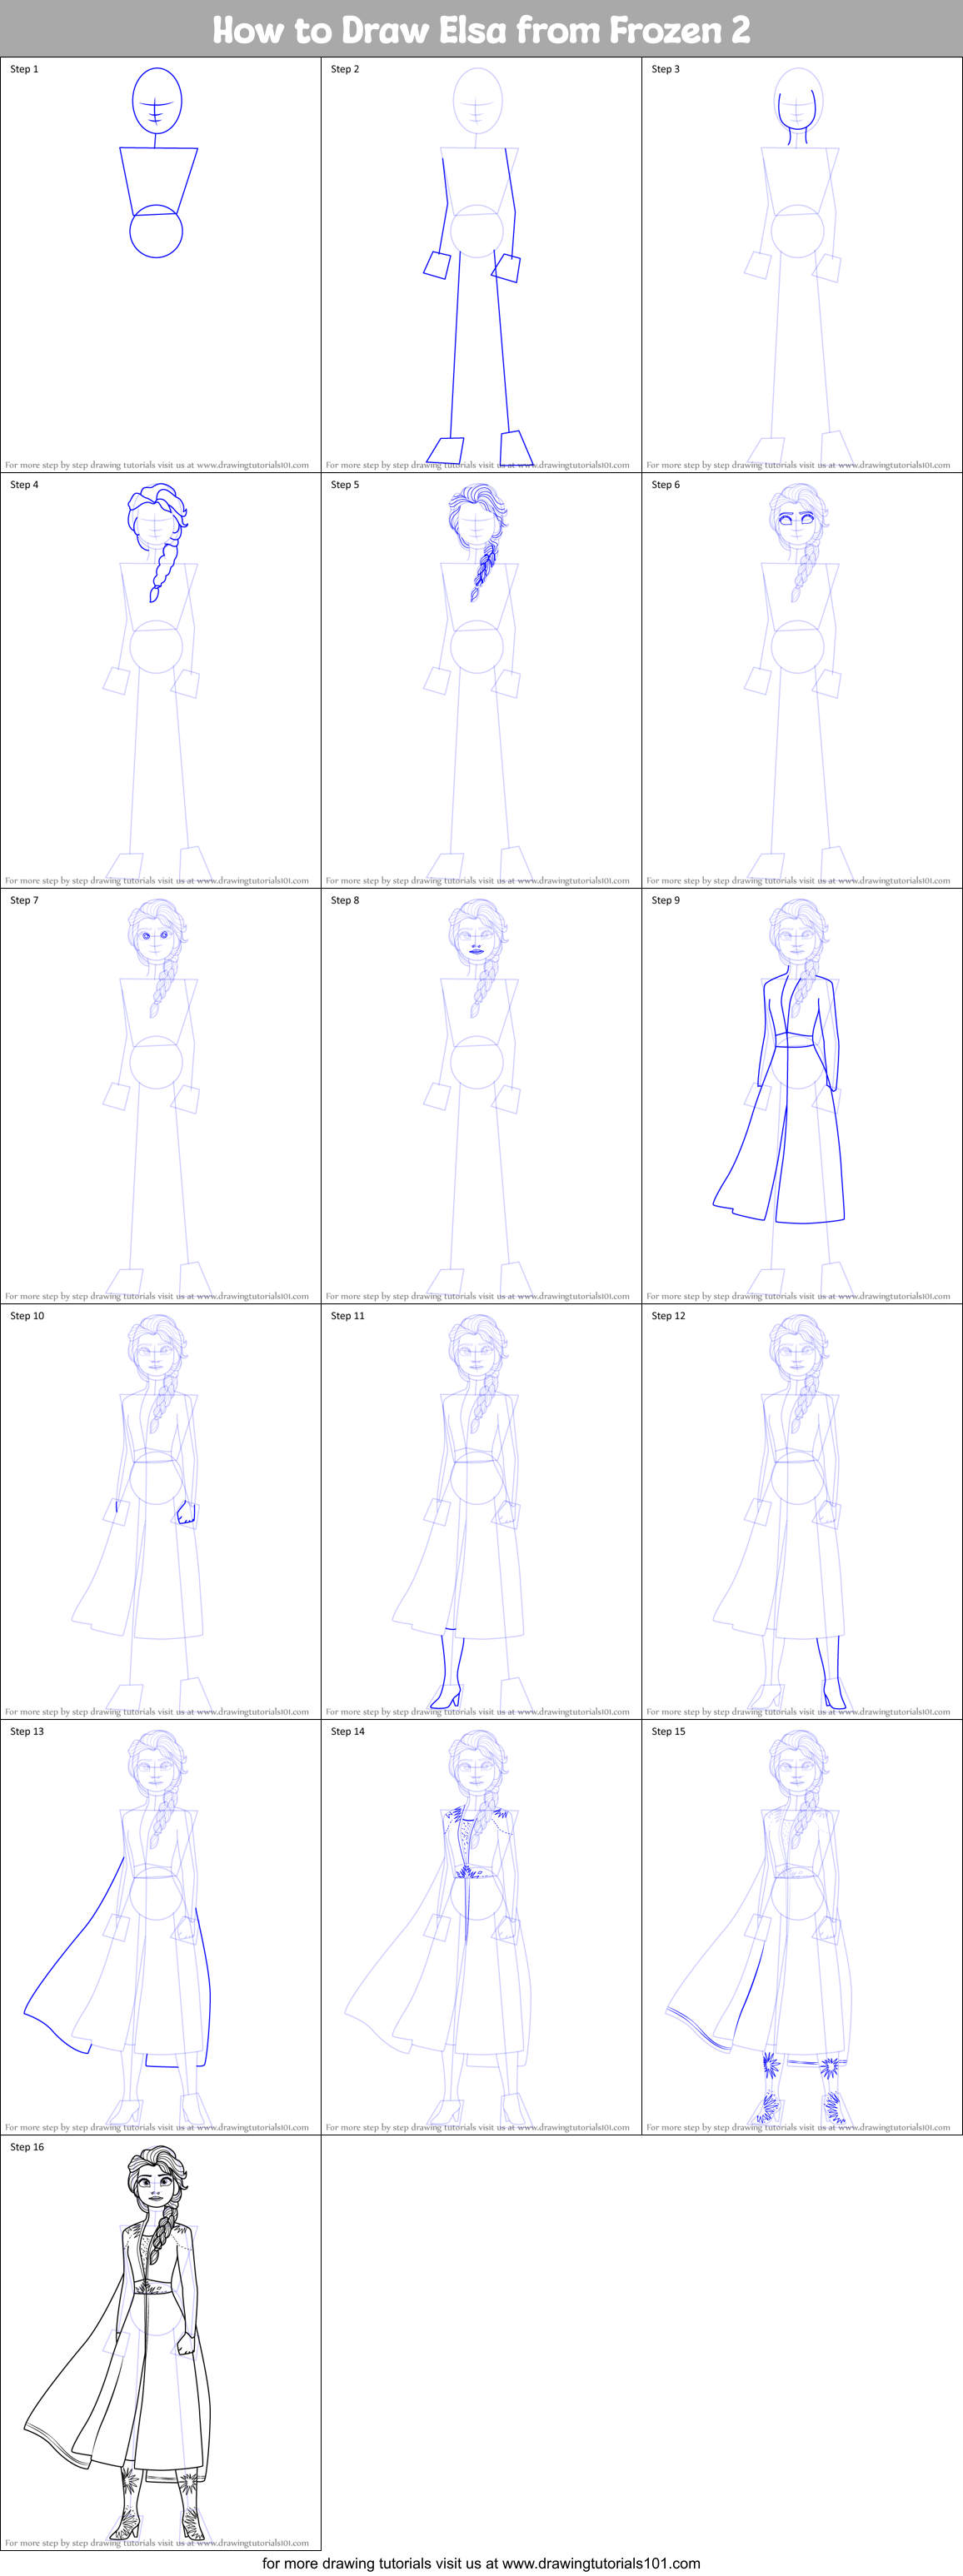 How to Draw Elsa from Frozen 2 printable step by step drawing sheet